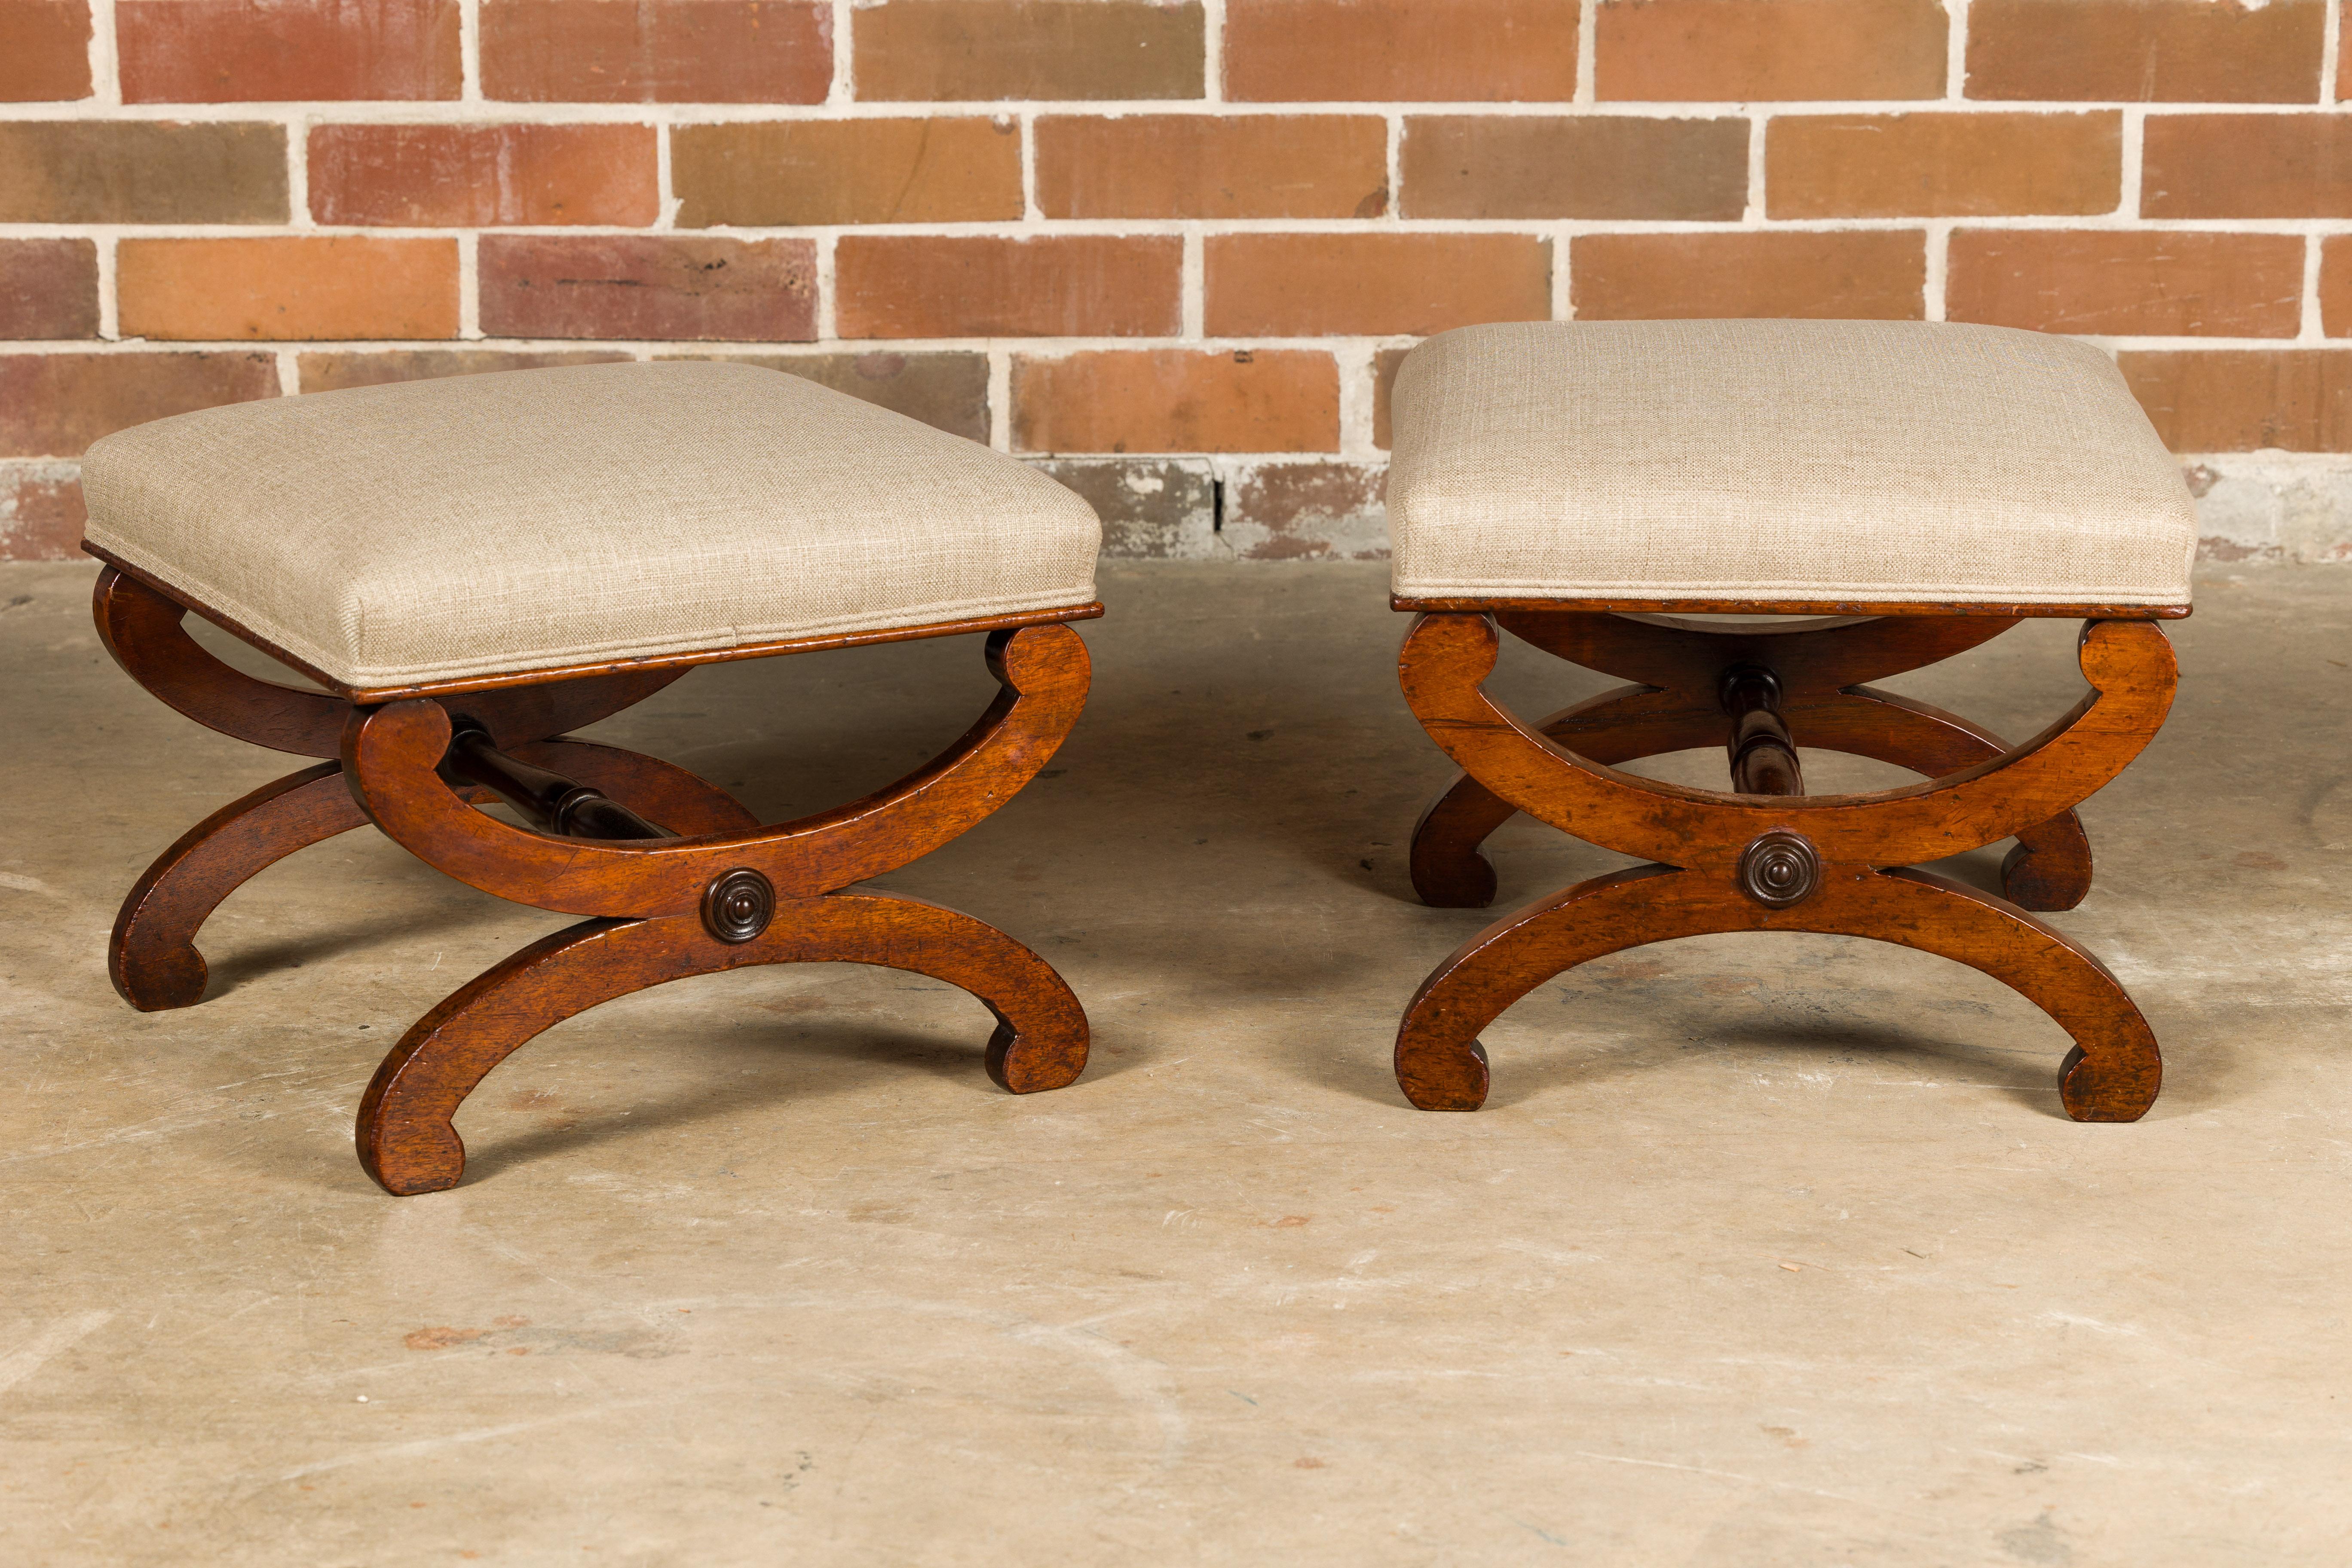 Biedermeier Period 19th Century Walnut Stools with X-Form Bases, a Pair For Sale 1